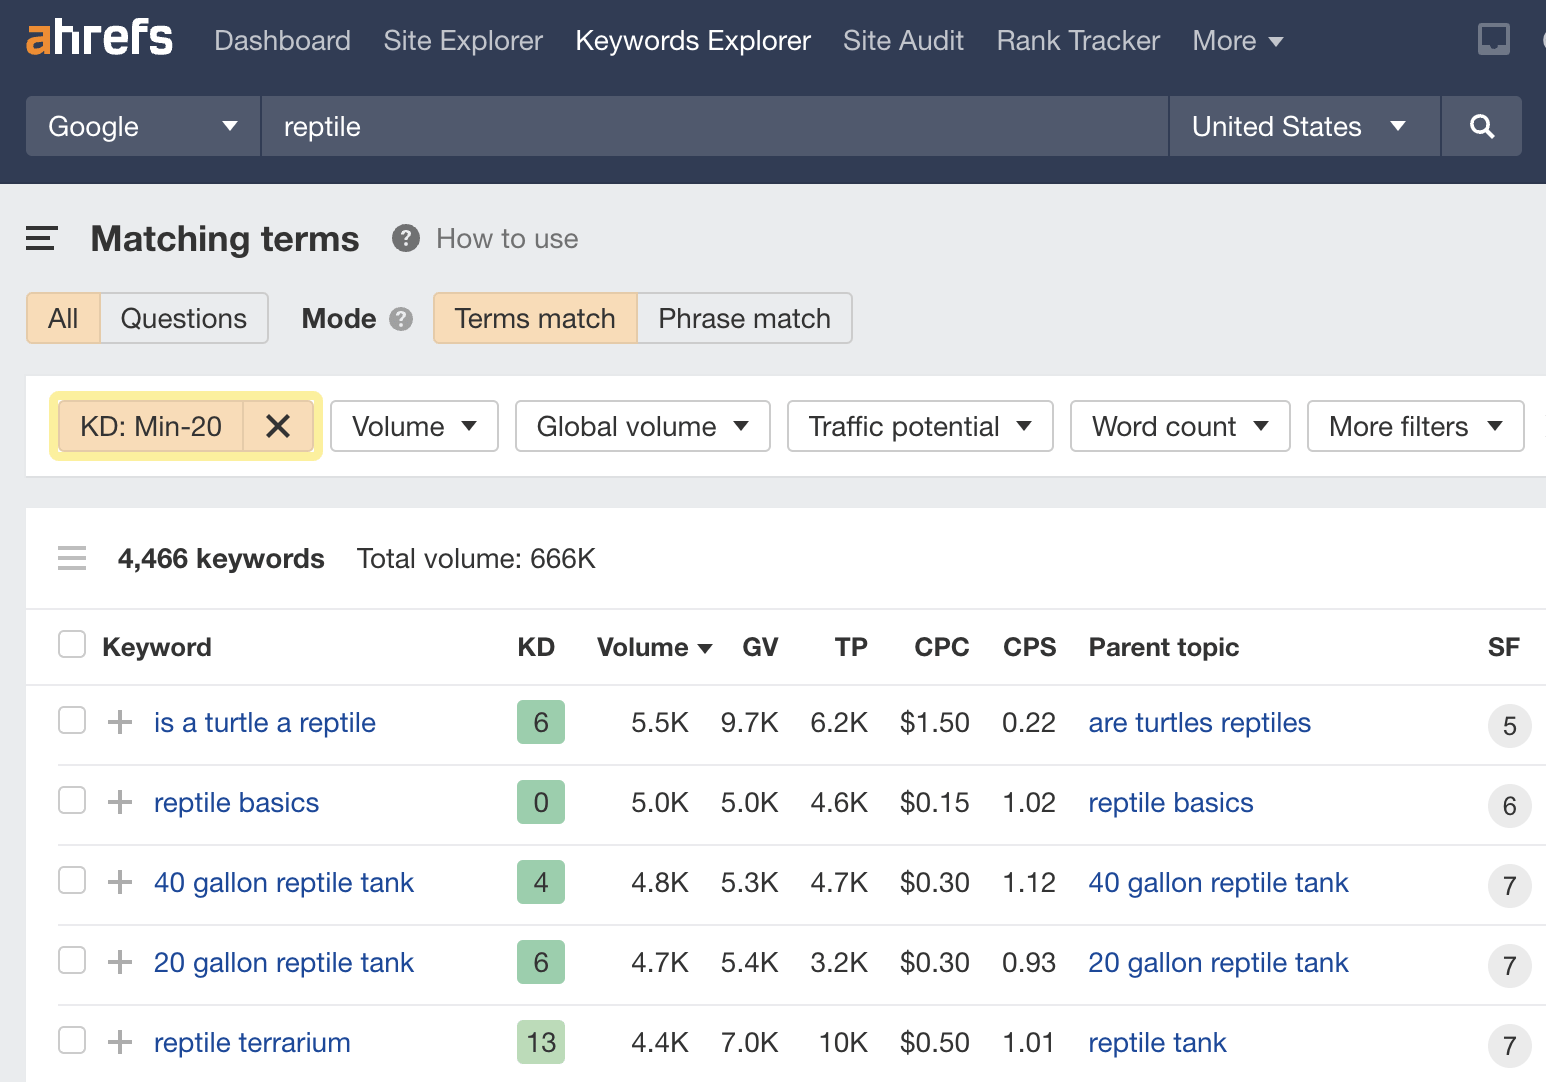 Matching terms report for low-KD, reptile-related keywords, via Ahrefs' Keywords Explorer